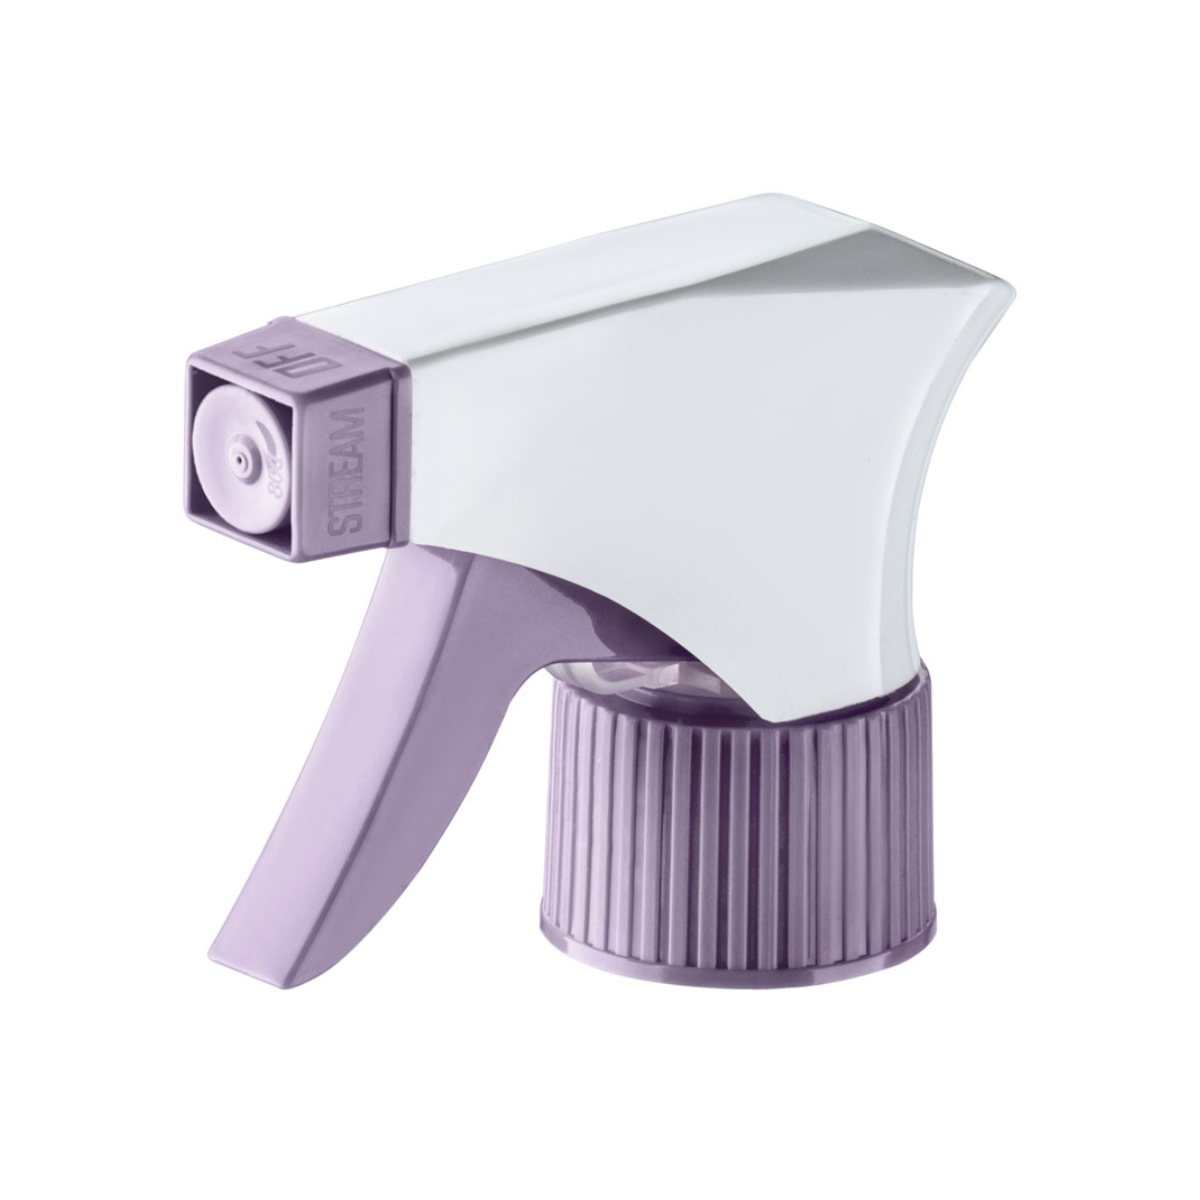 Dompel Trigger Sprayers valves, color lilac, thread 28/410, made with stainless steel springs and glass balls, with spray and stream Model 101D - depilcompany